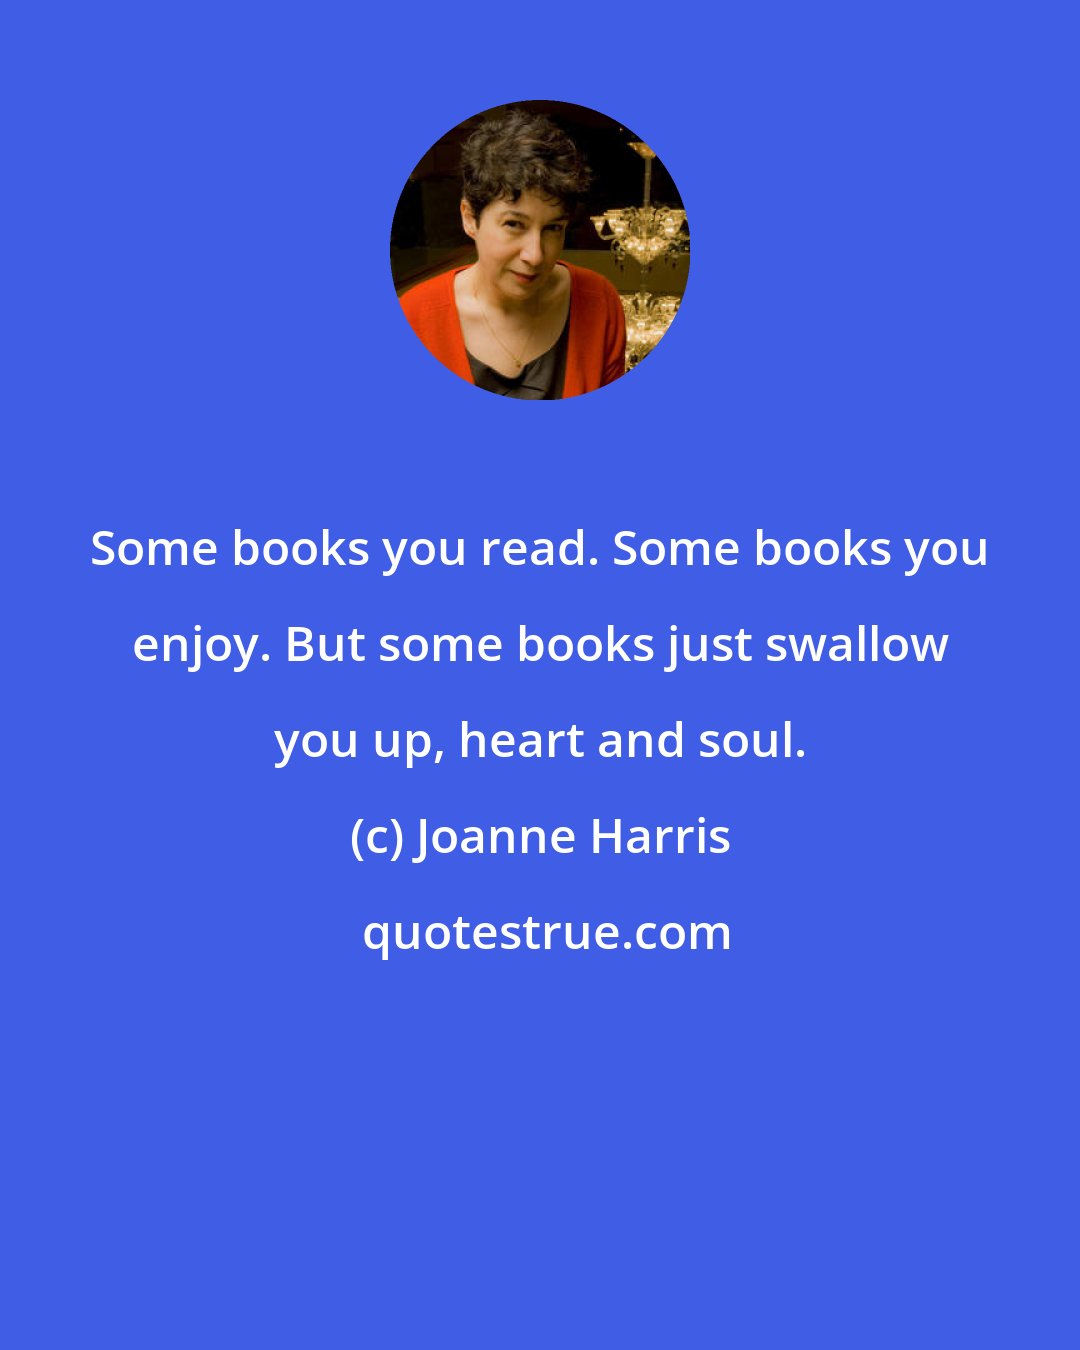 Joanne Harris: Some books you read. Some books you enjoy. But some books just swallow you up, heart and soul.